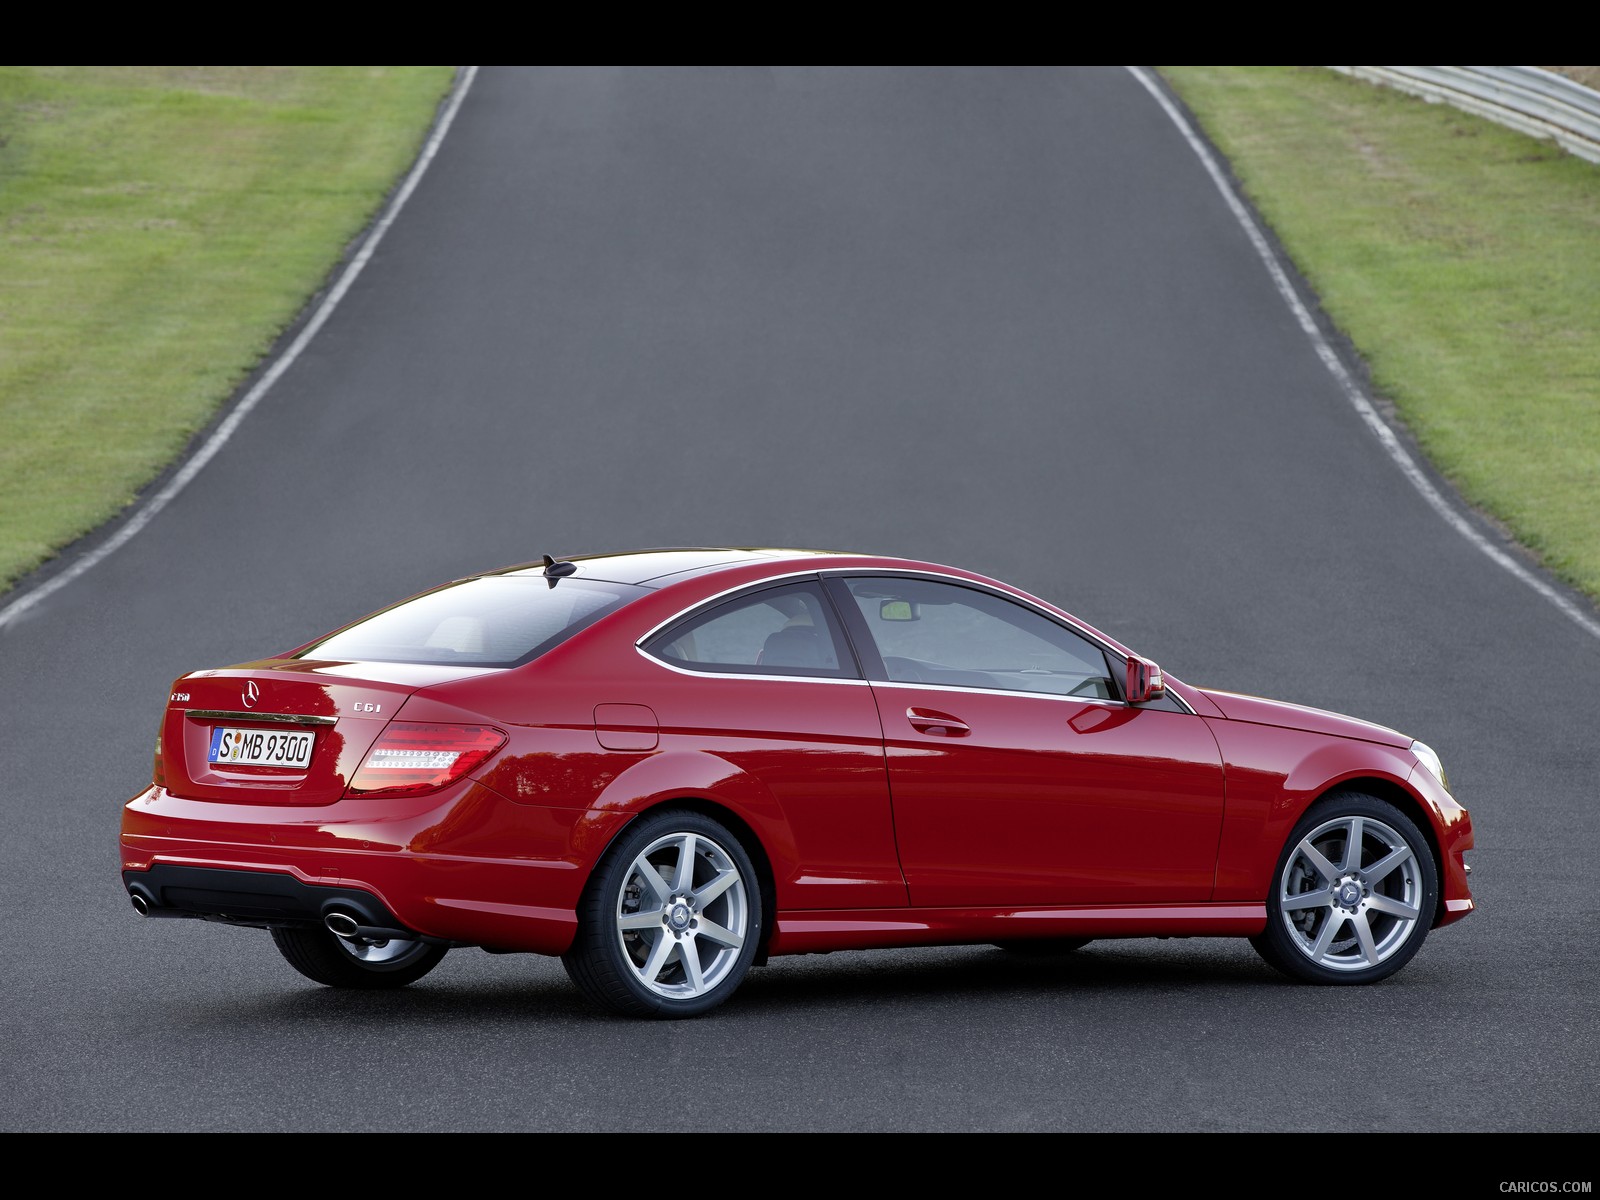 Mercedes-Benz C-Class Coupe (2012)  - Side, #37 of 79